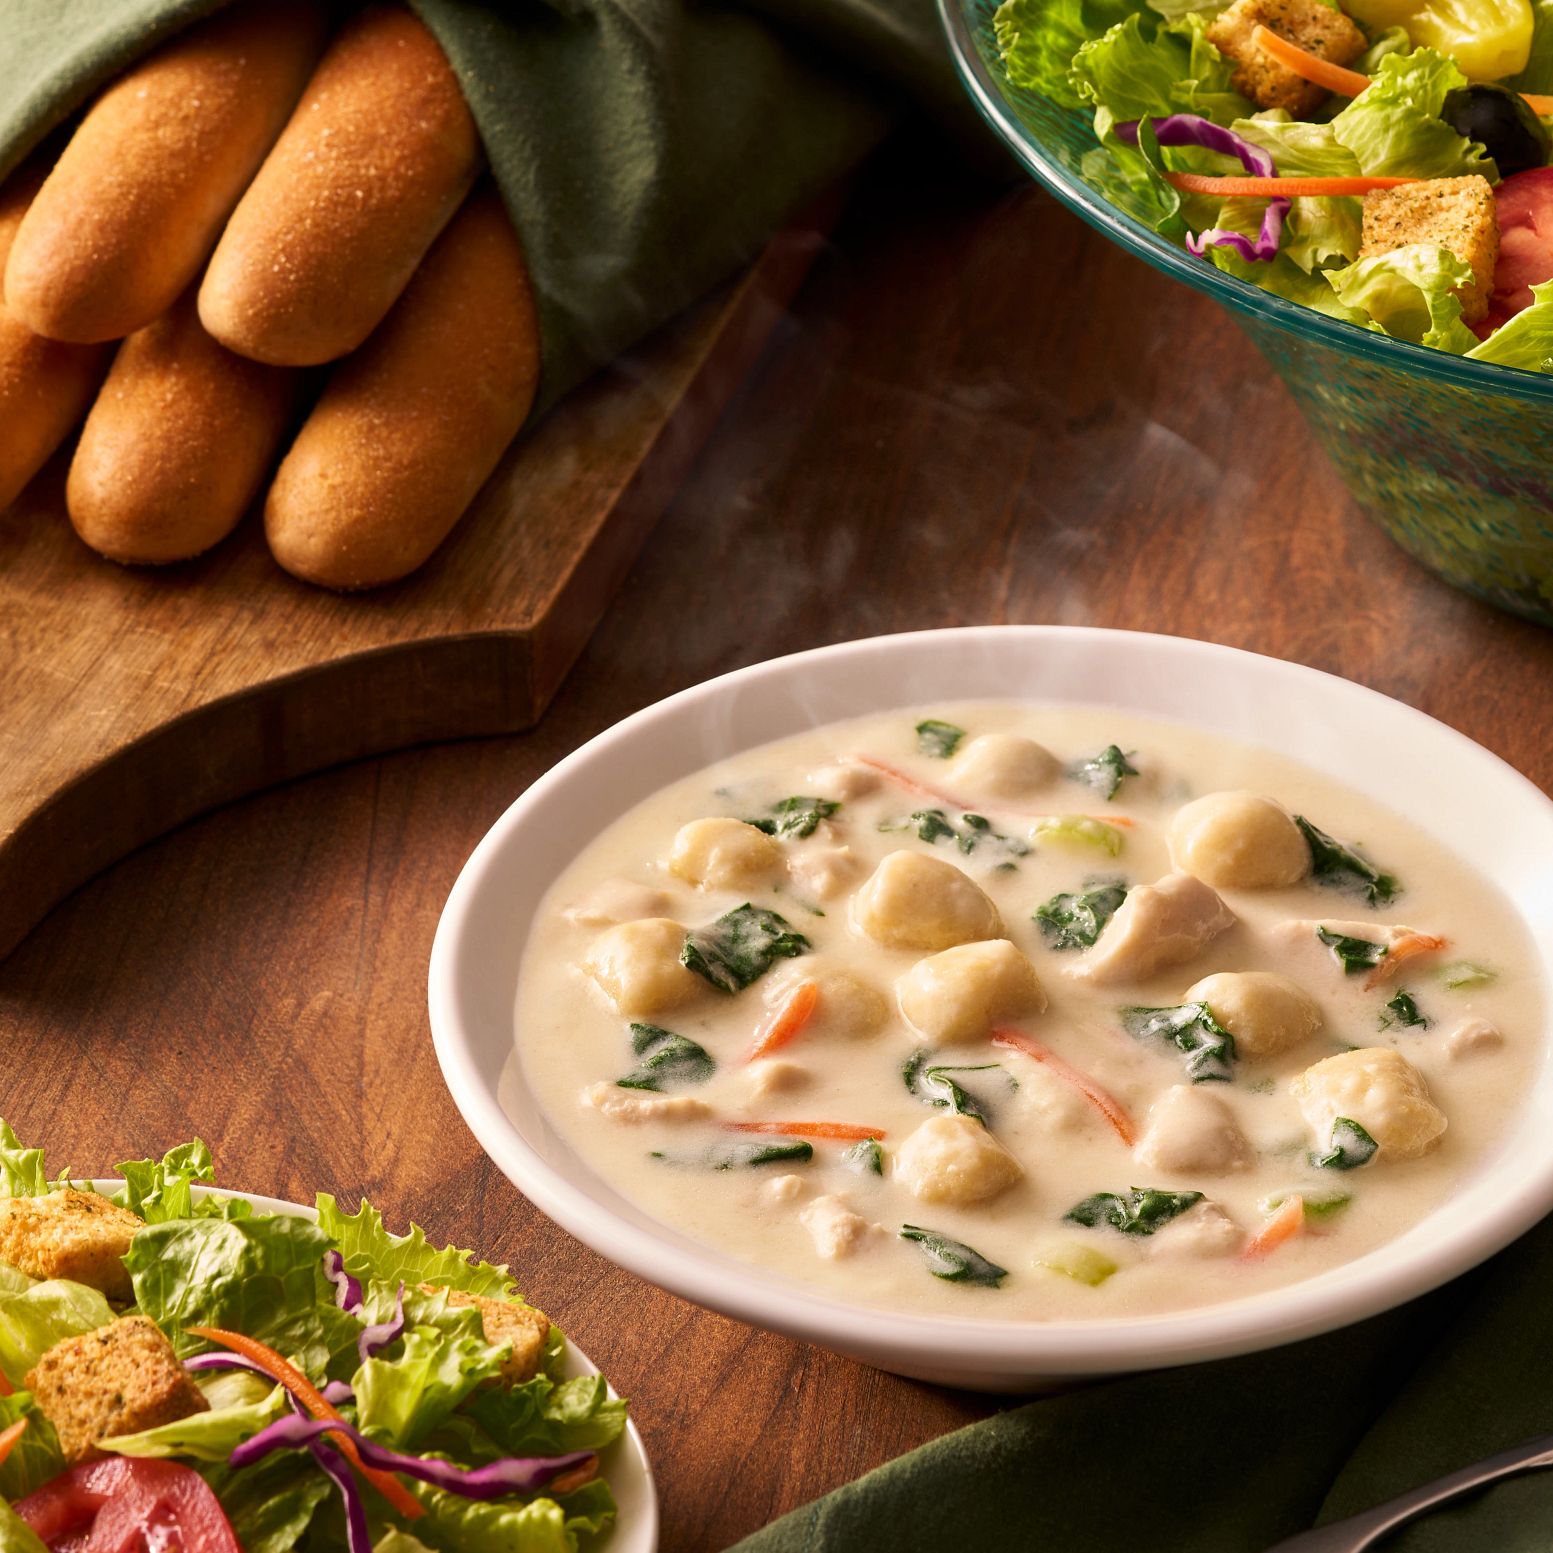 Chicken & Gnocchi: A creamy soup made with roasted chicken, Italian dumplings and spinach. Olive Garden Italian Restaurant Albuquerque (505)881-8425